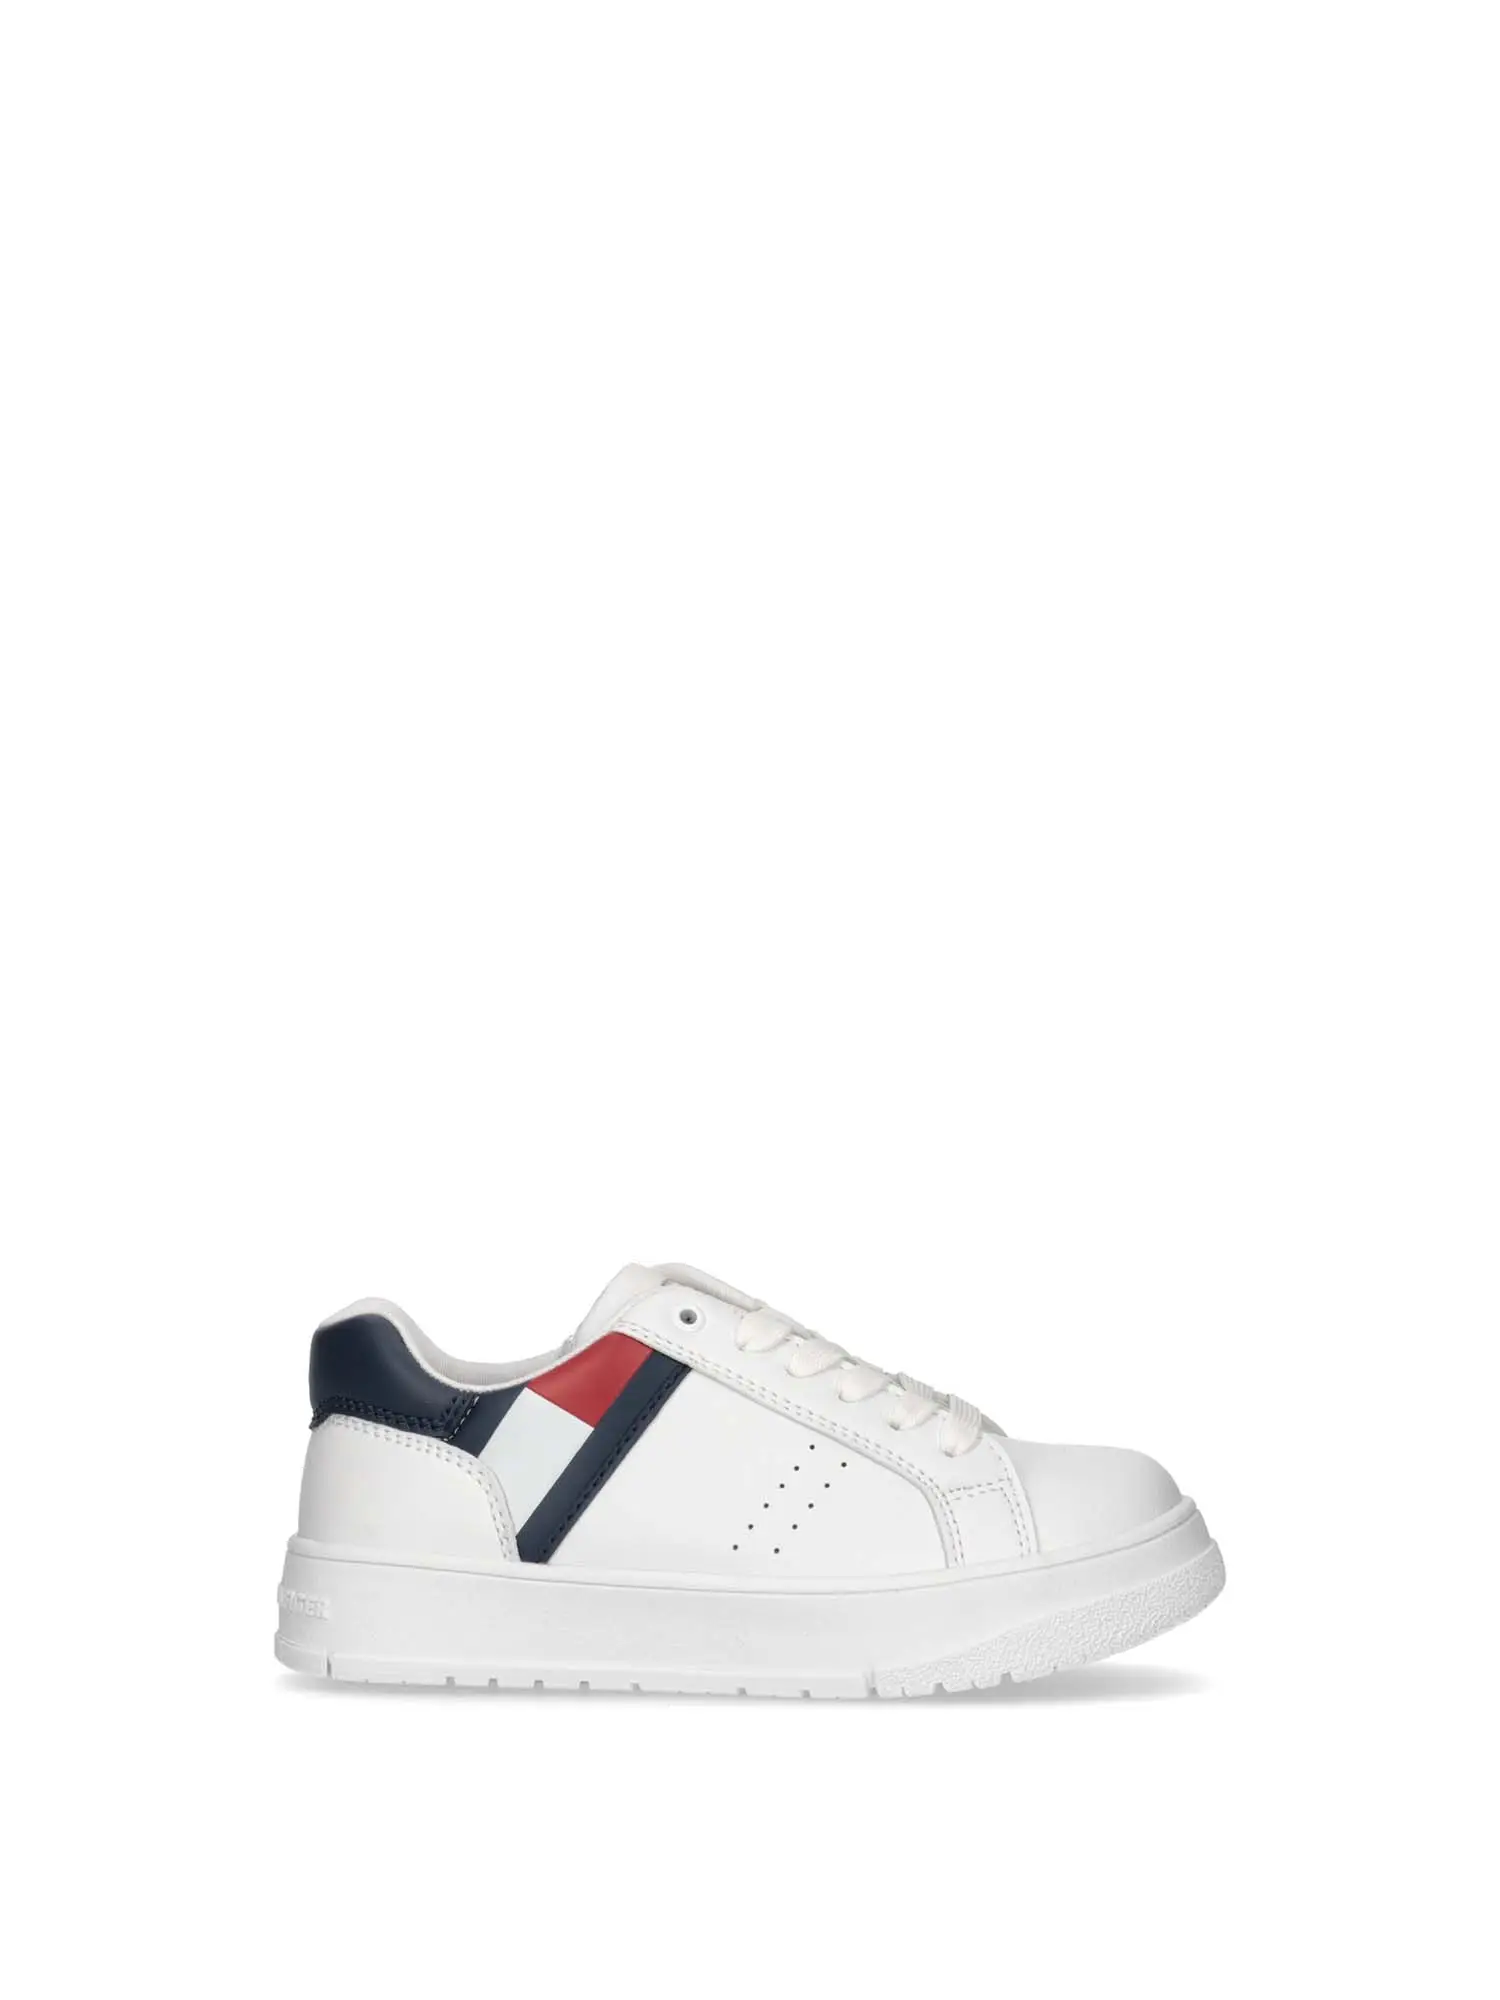 SNEAKERS UNISEX - TOMMY HILFIGER - T3X9-33356-1355 - BIANCO, 35